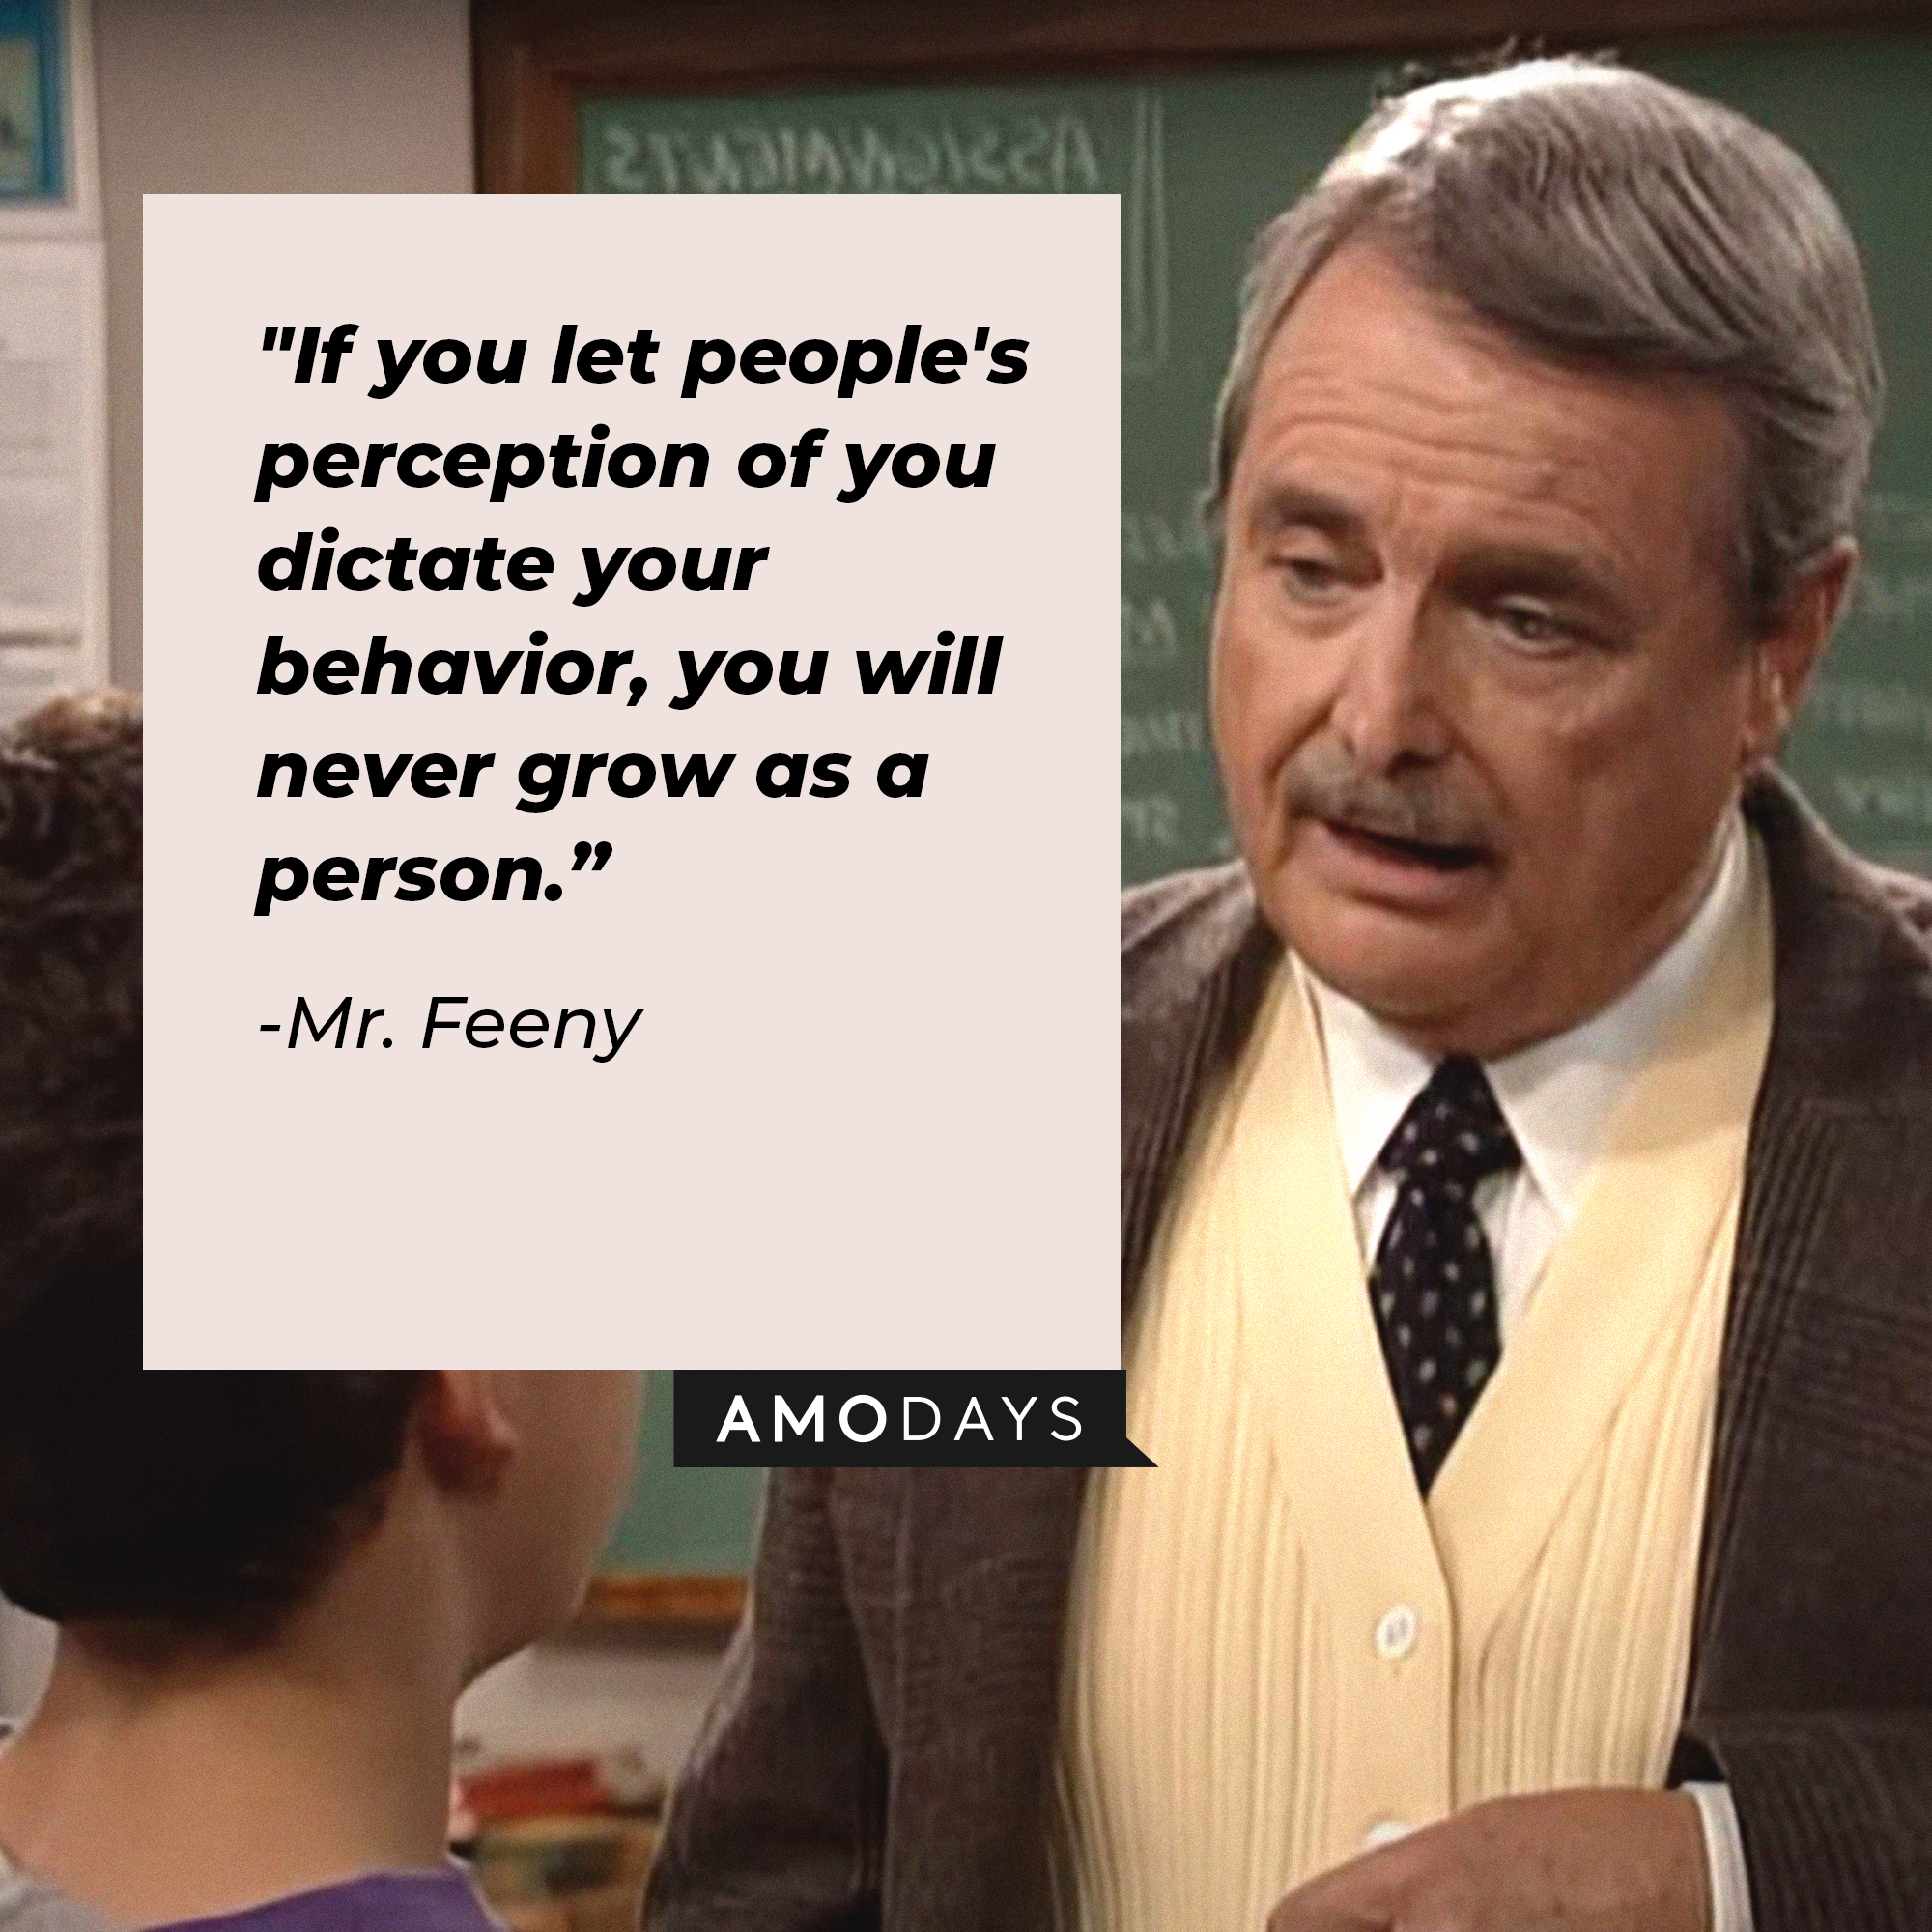 An image of Mr. Feeny with his quote: "If you let people's perception of you dictate your behavior, you will never grow as a person.” | Source: facebook.com/BoyMeetsWorldSeries